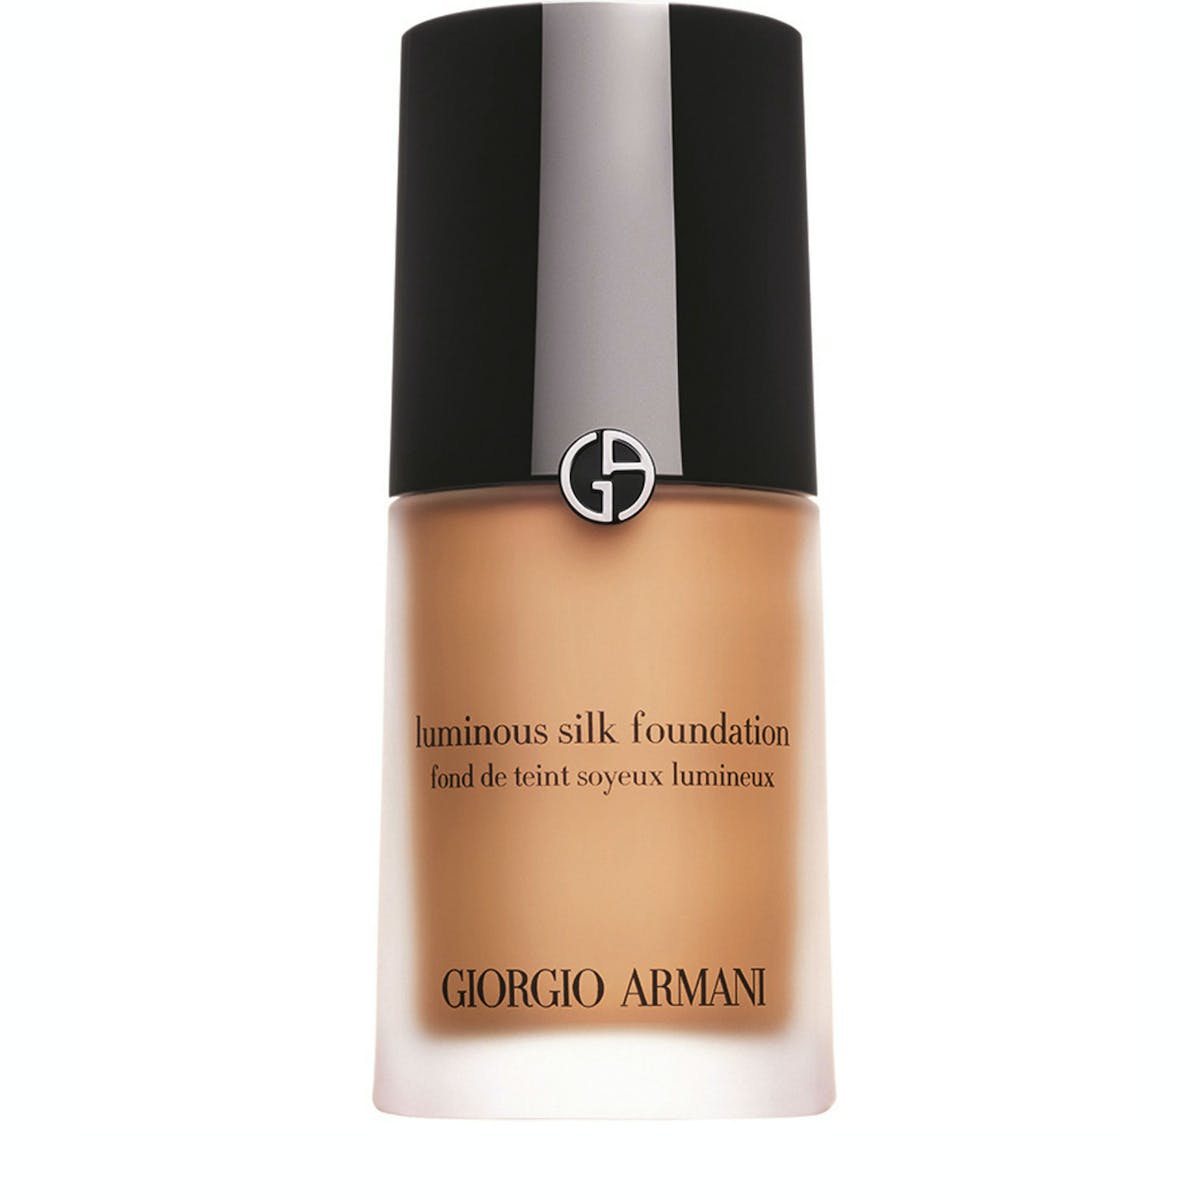 The best full coverage foundation for dry skin